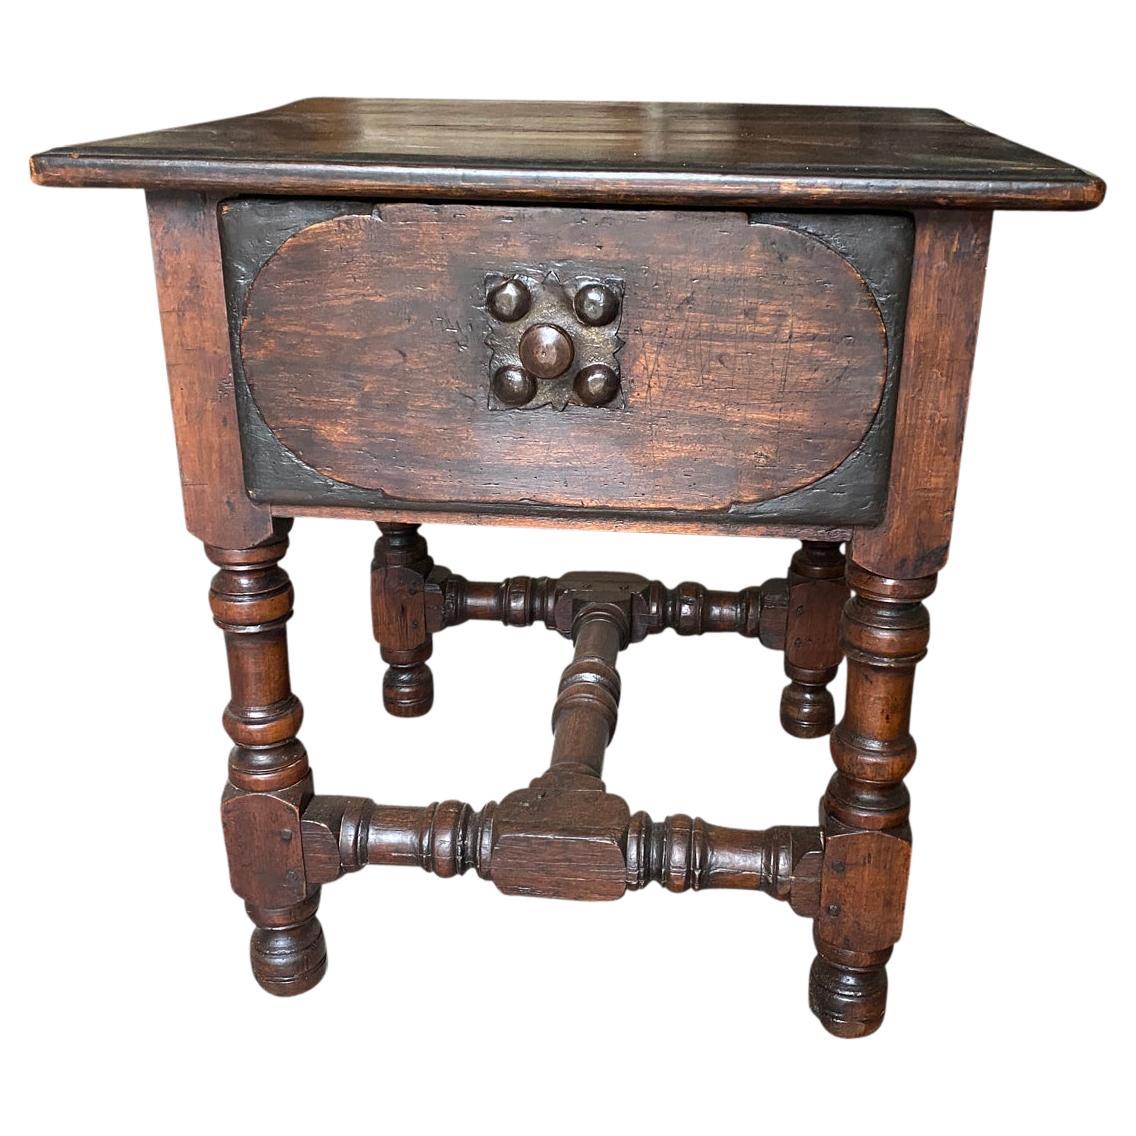 Arte Populaire French 18th Century Side Table